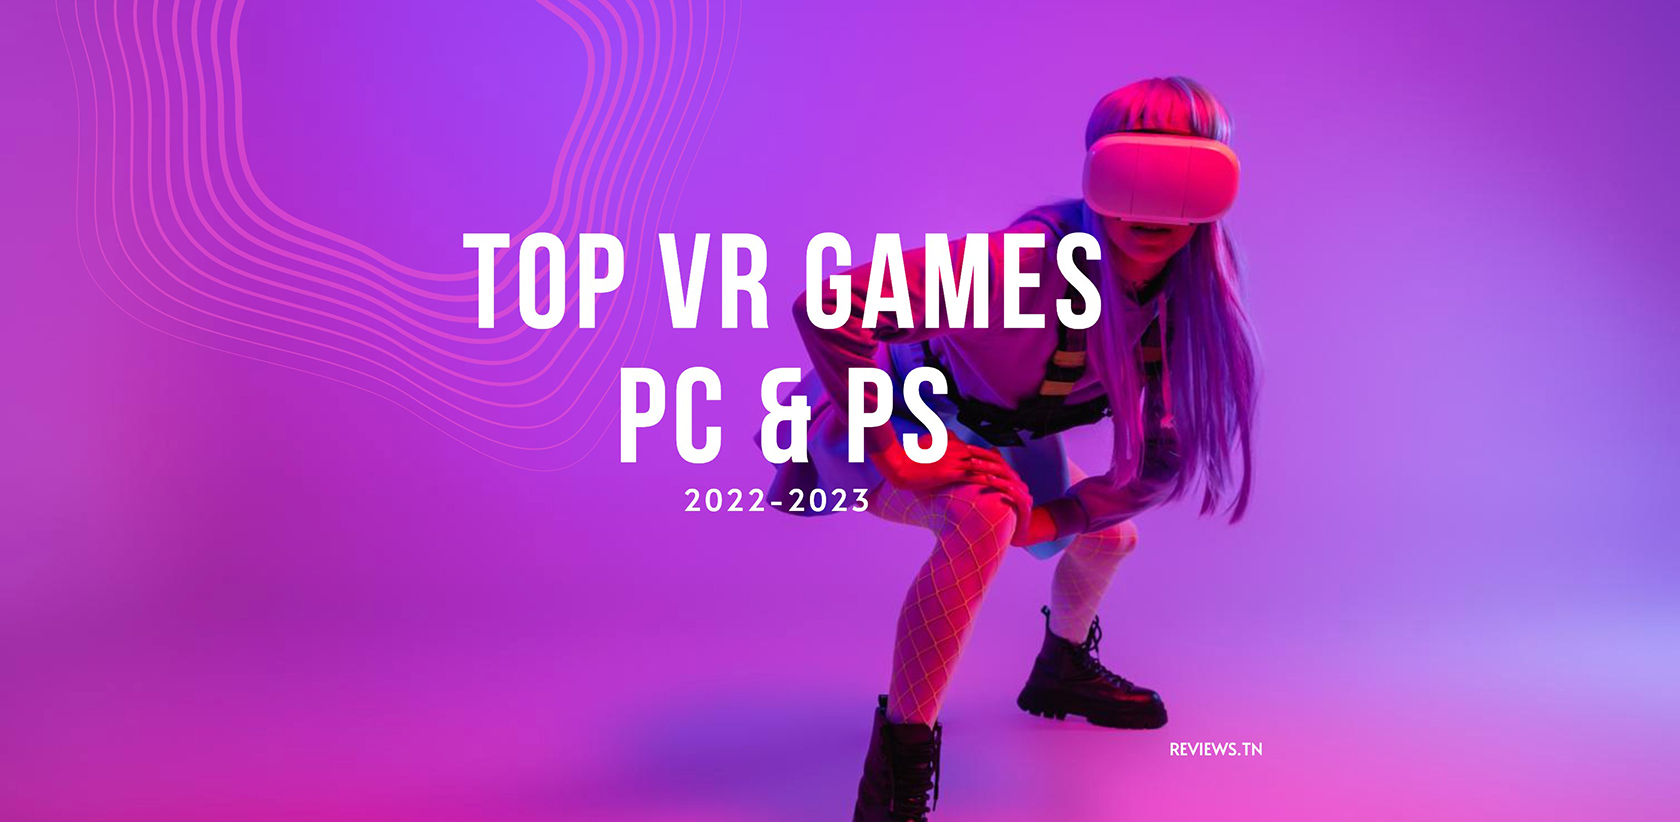 Top Best VR Games on PC, PS, Oculus & Consoles